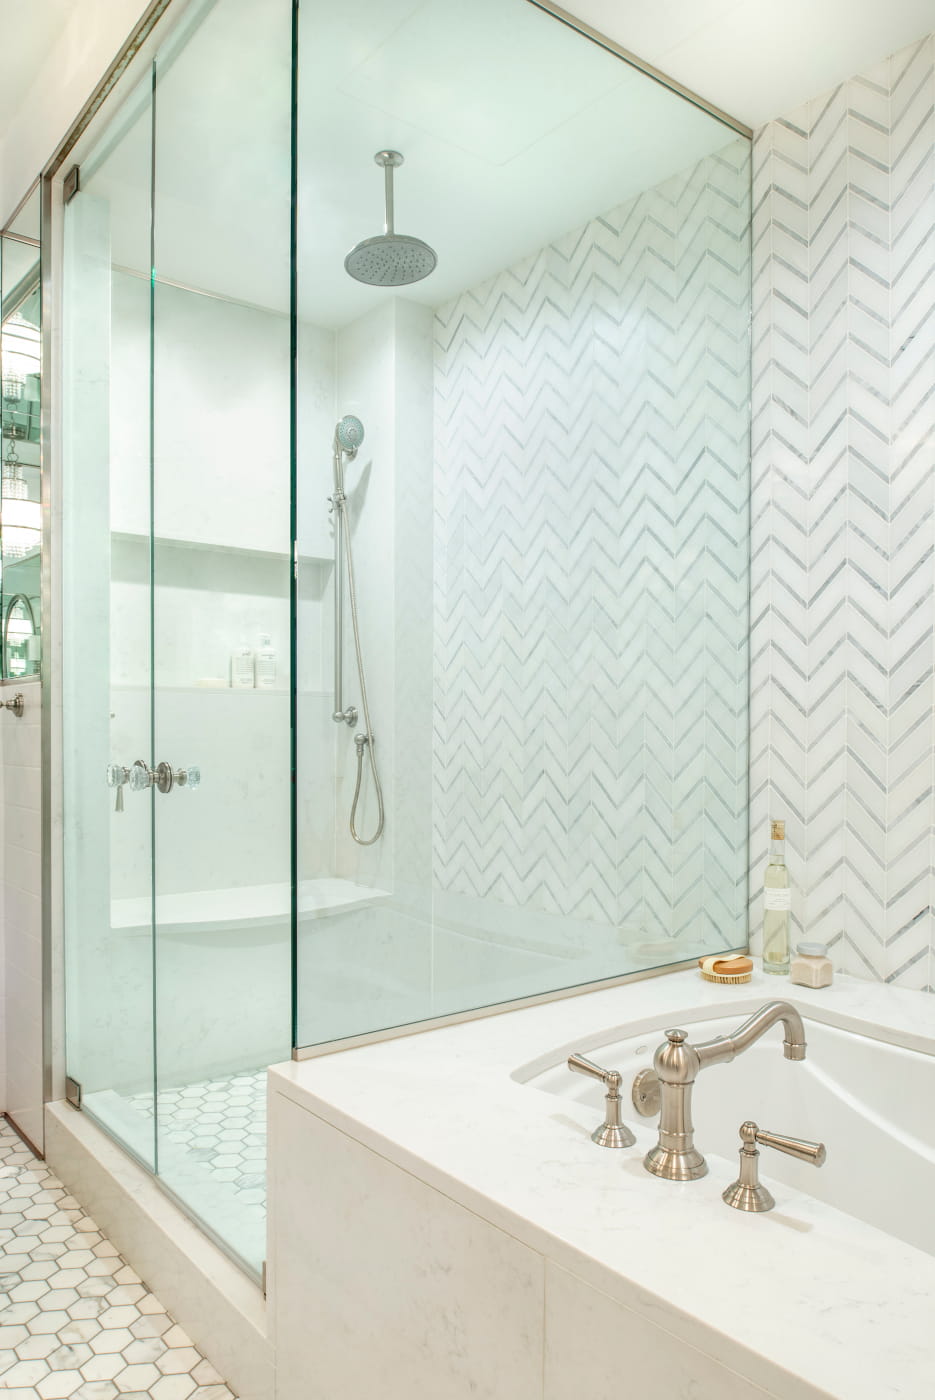 The glass shower is generously sized, with a bench seat, a large nook for bottles, and both rain and hand-held shower heads.